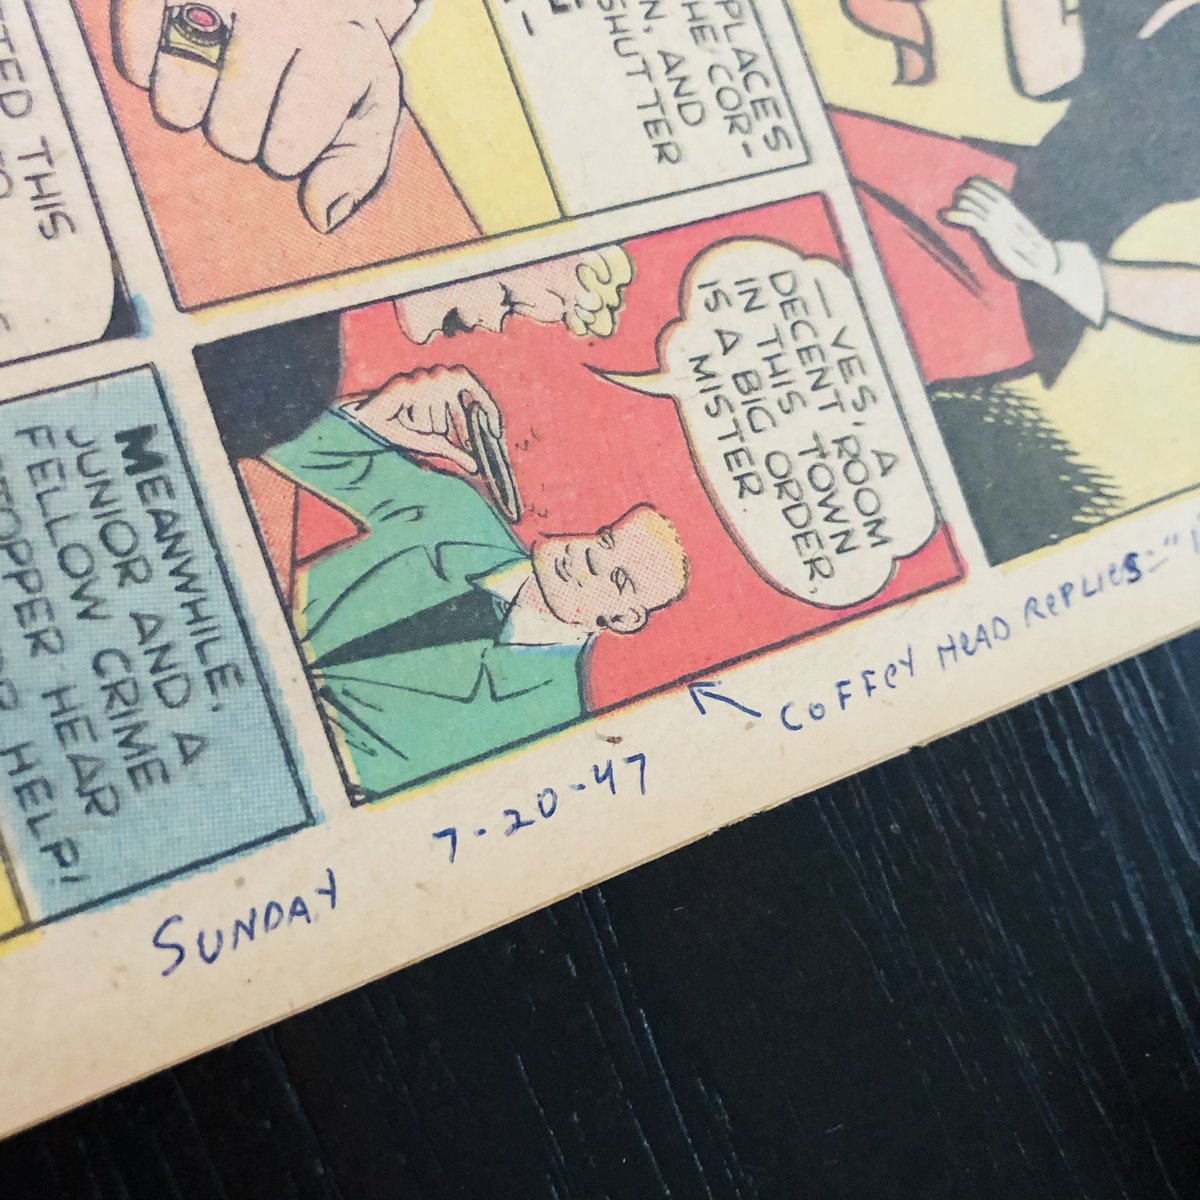 So I was paging through this #DickTracy #GoldenAge book from 1952 and I see all these notations on the edges 😊 with the date 1947 can someone tell me what this means? I’m loving reading through the notes 📝 
@Faustuszero @CBCCPodcast @RobWorst @mediummic